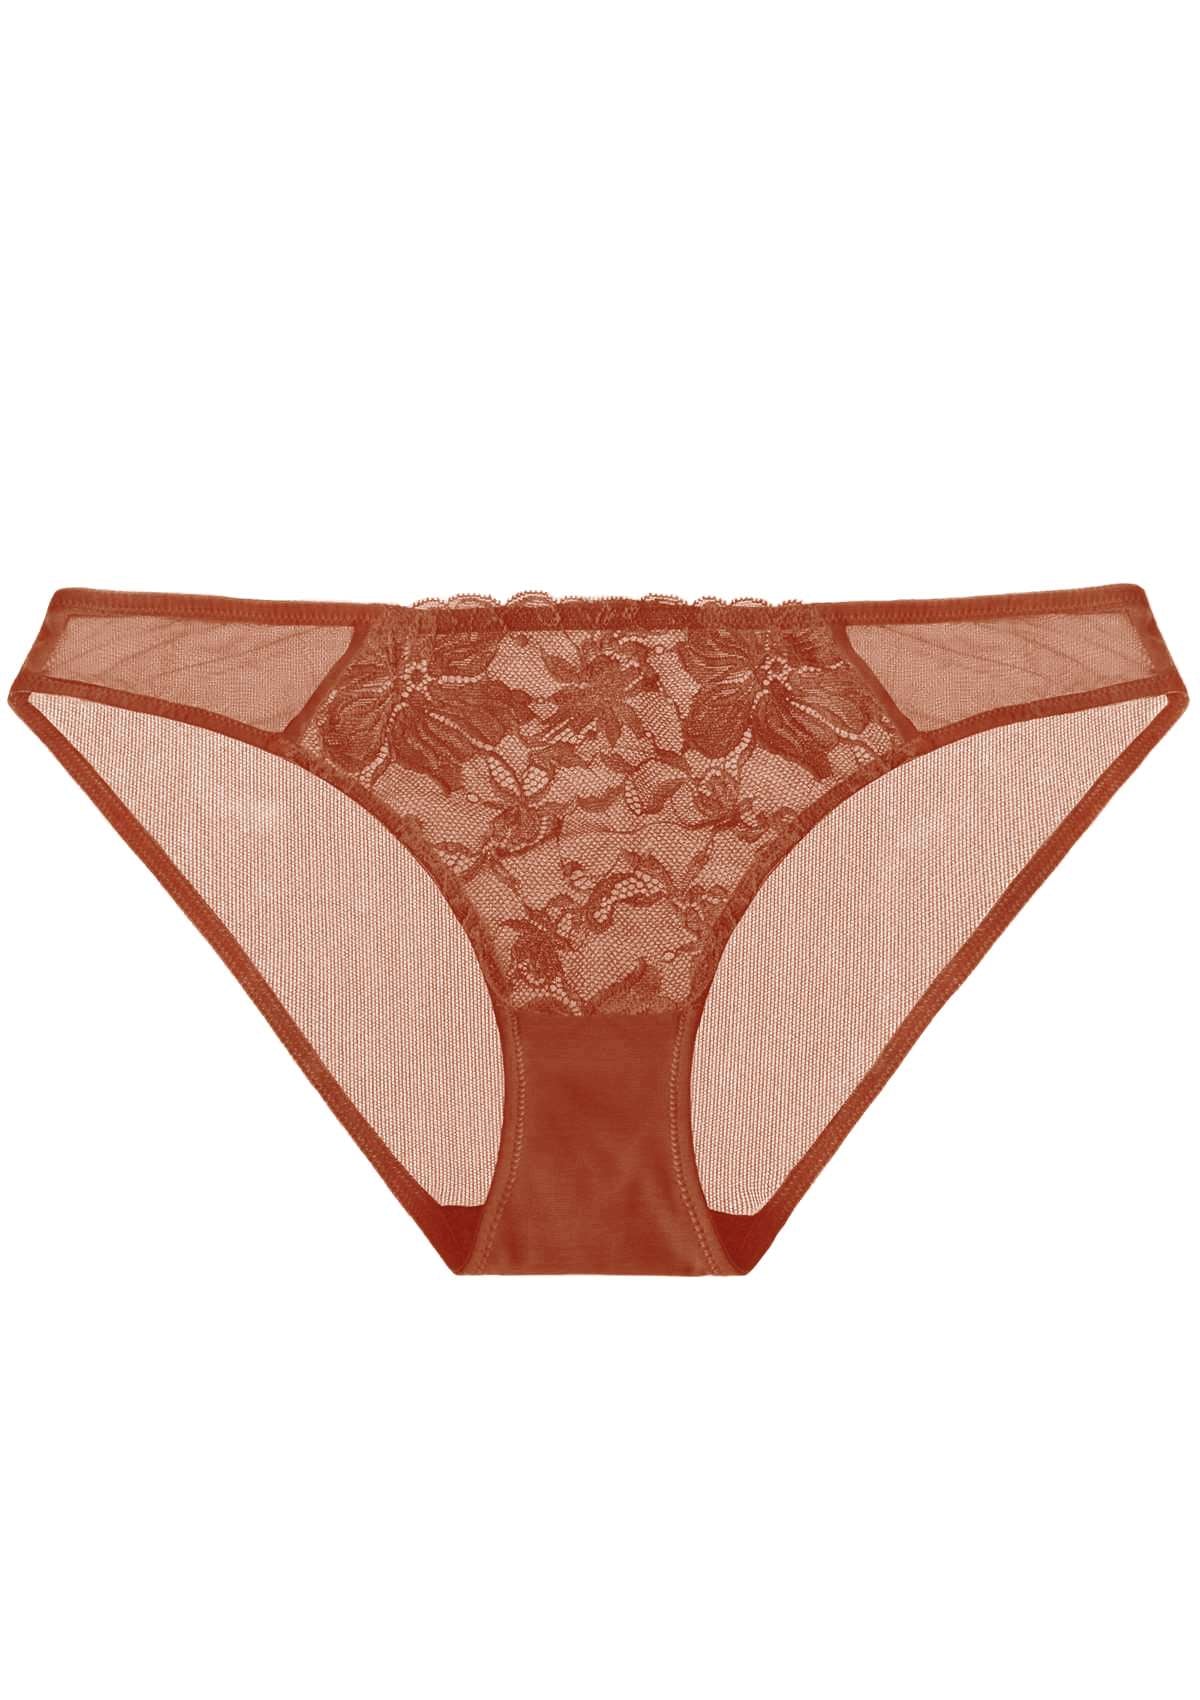 HSIA Mid-Rise Lace And Mesh Panty - Stylish Comfort For Every Day - XL / Copper Red